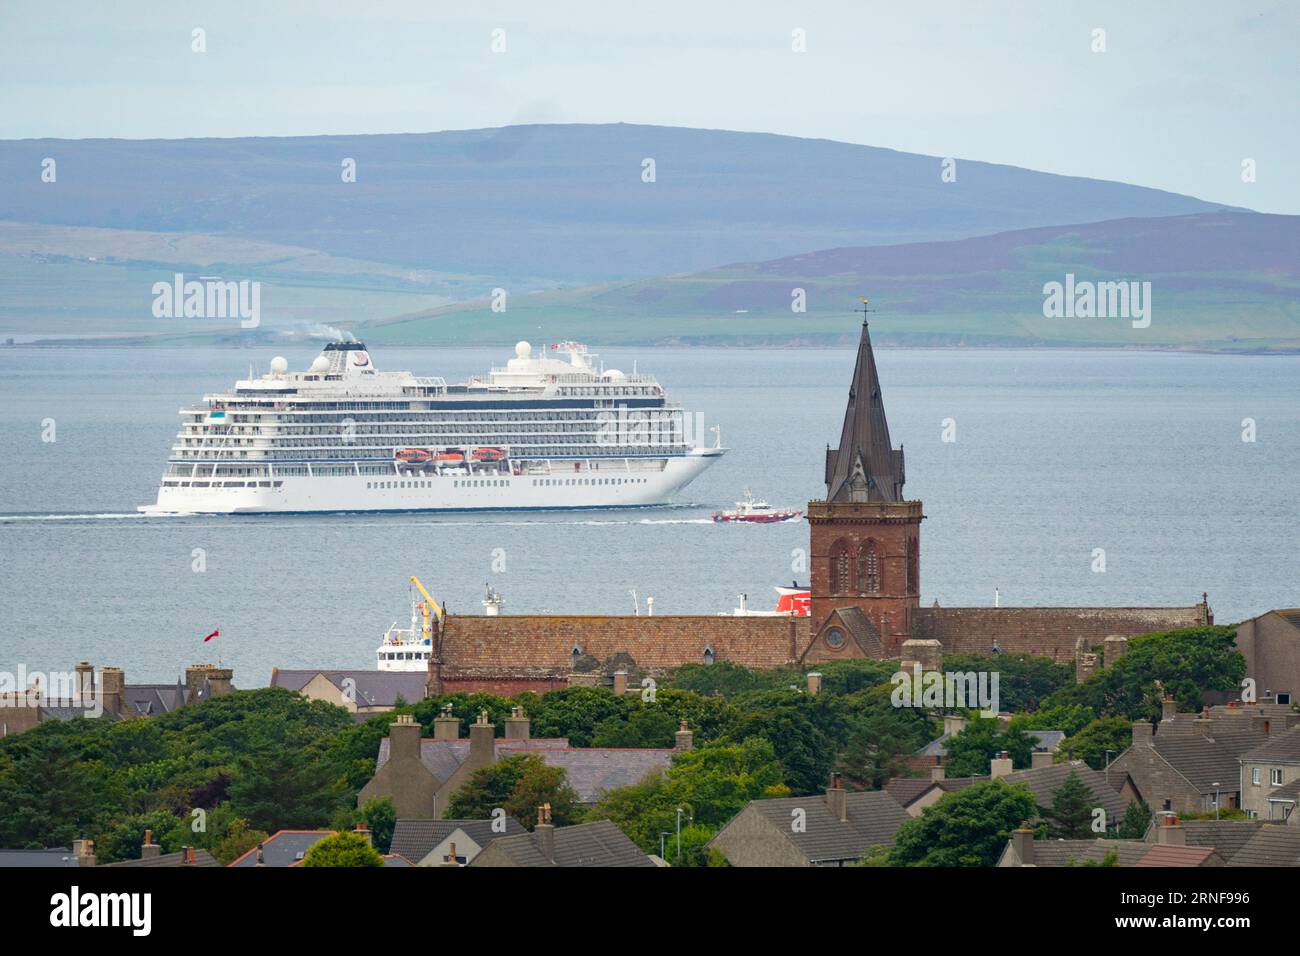 Stromness, Orkney,  Scotland, UK. 1st September 2023. American tourists from visiting cruise ships berthed at Kirkwall visit the Ring of Brodgar neolithic standing stone circle on Orkney. Concerns have been raised by locals that cruise ships are bringing too many tourists to the Islands and current infrastructure cannot cope. Pic; Cruise ship sails past St Magnus Cathedral as it leaves Kirkwall port.  Iain Masterton/Alamy Live News Stock Photo